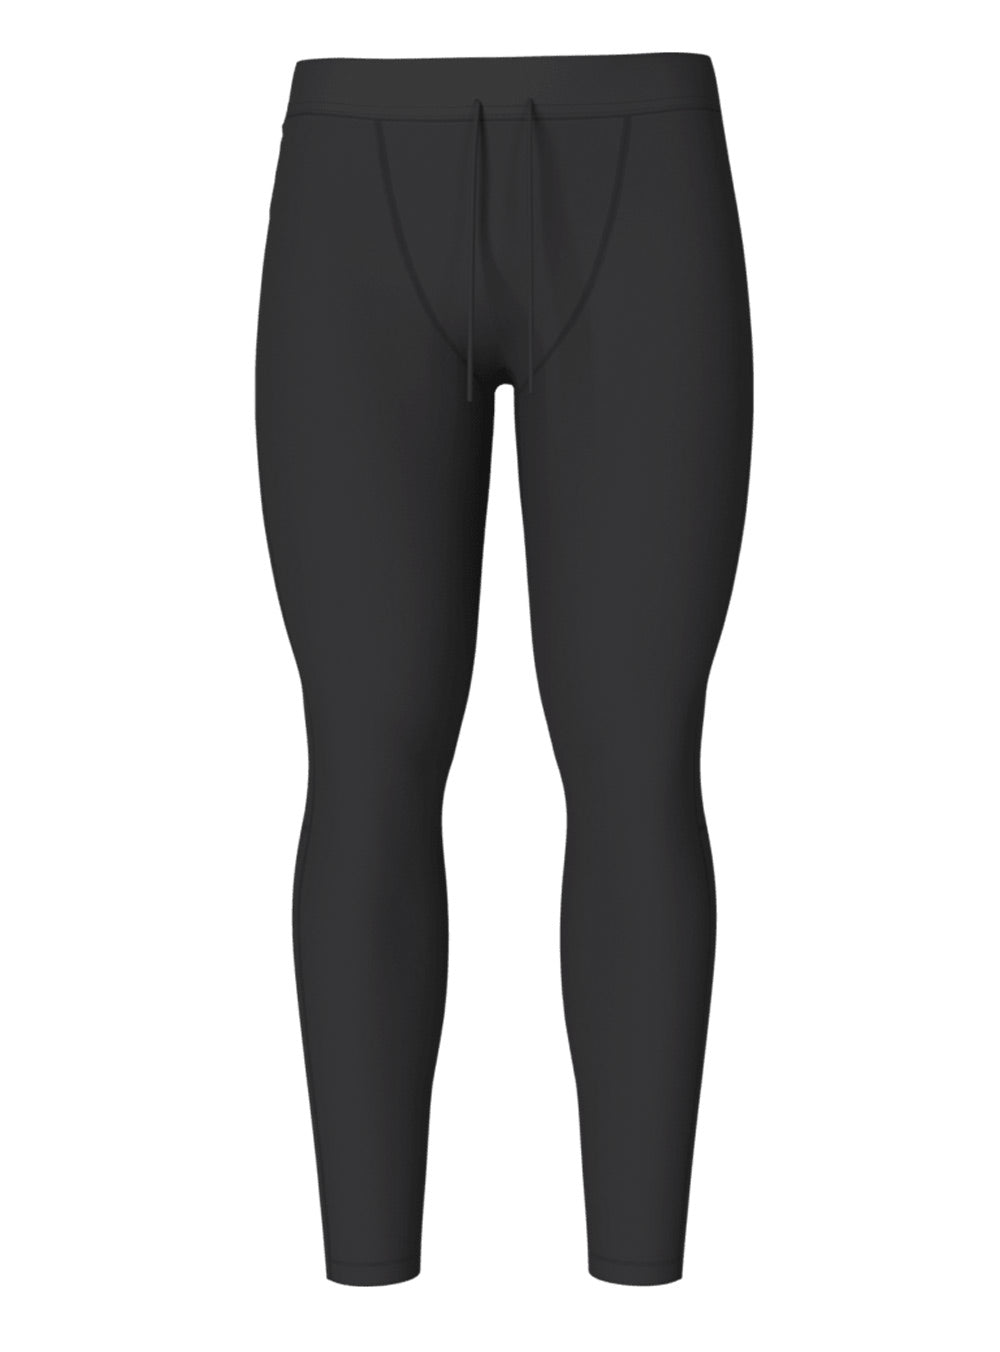 L. 3/4 REVERSIBLE TIGHTS BE ONE Double-face leggings - Women